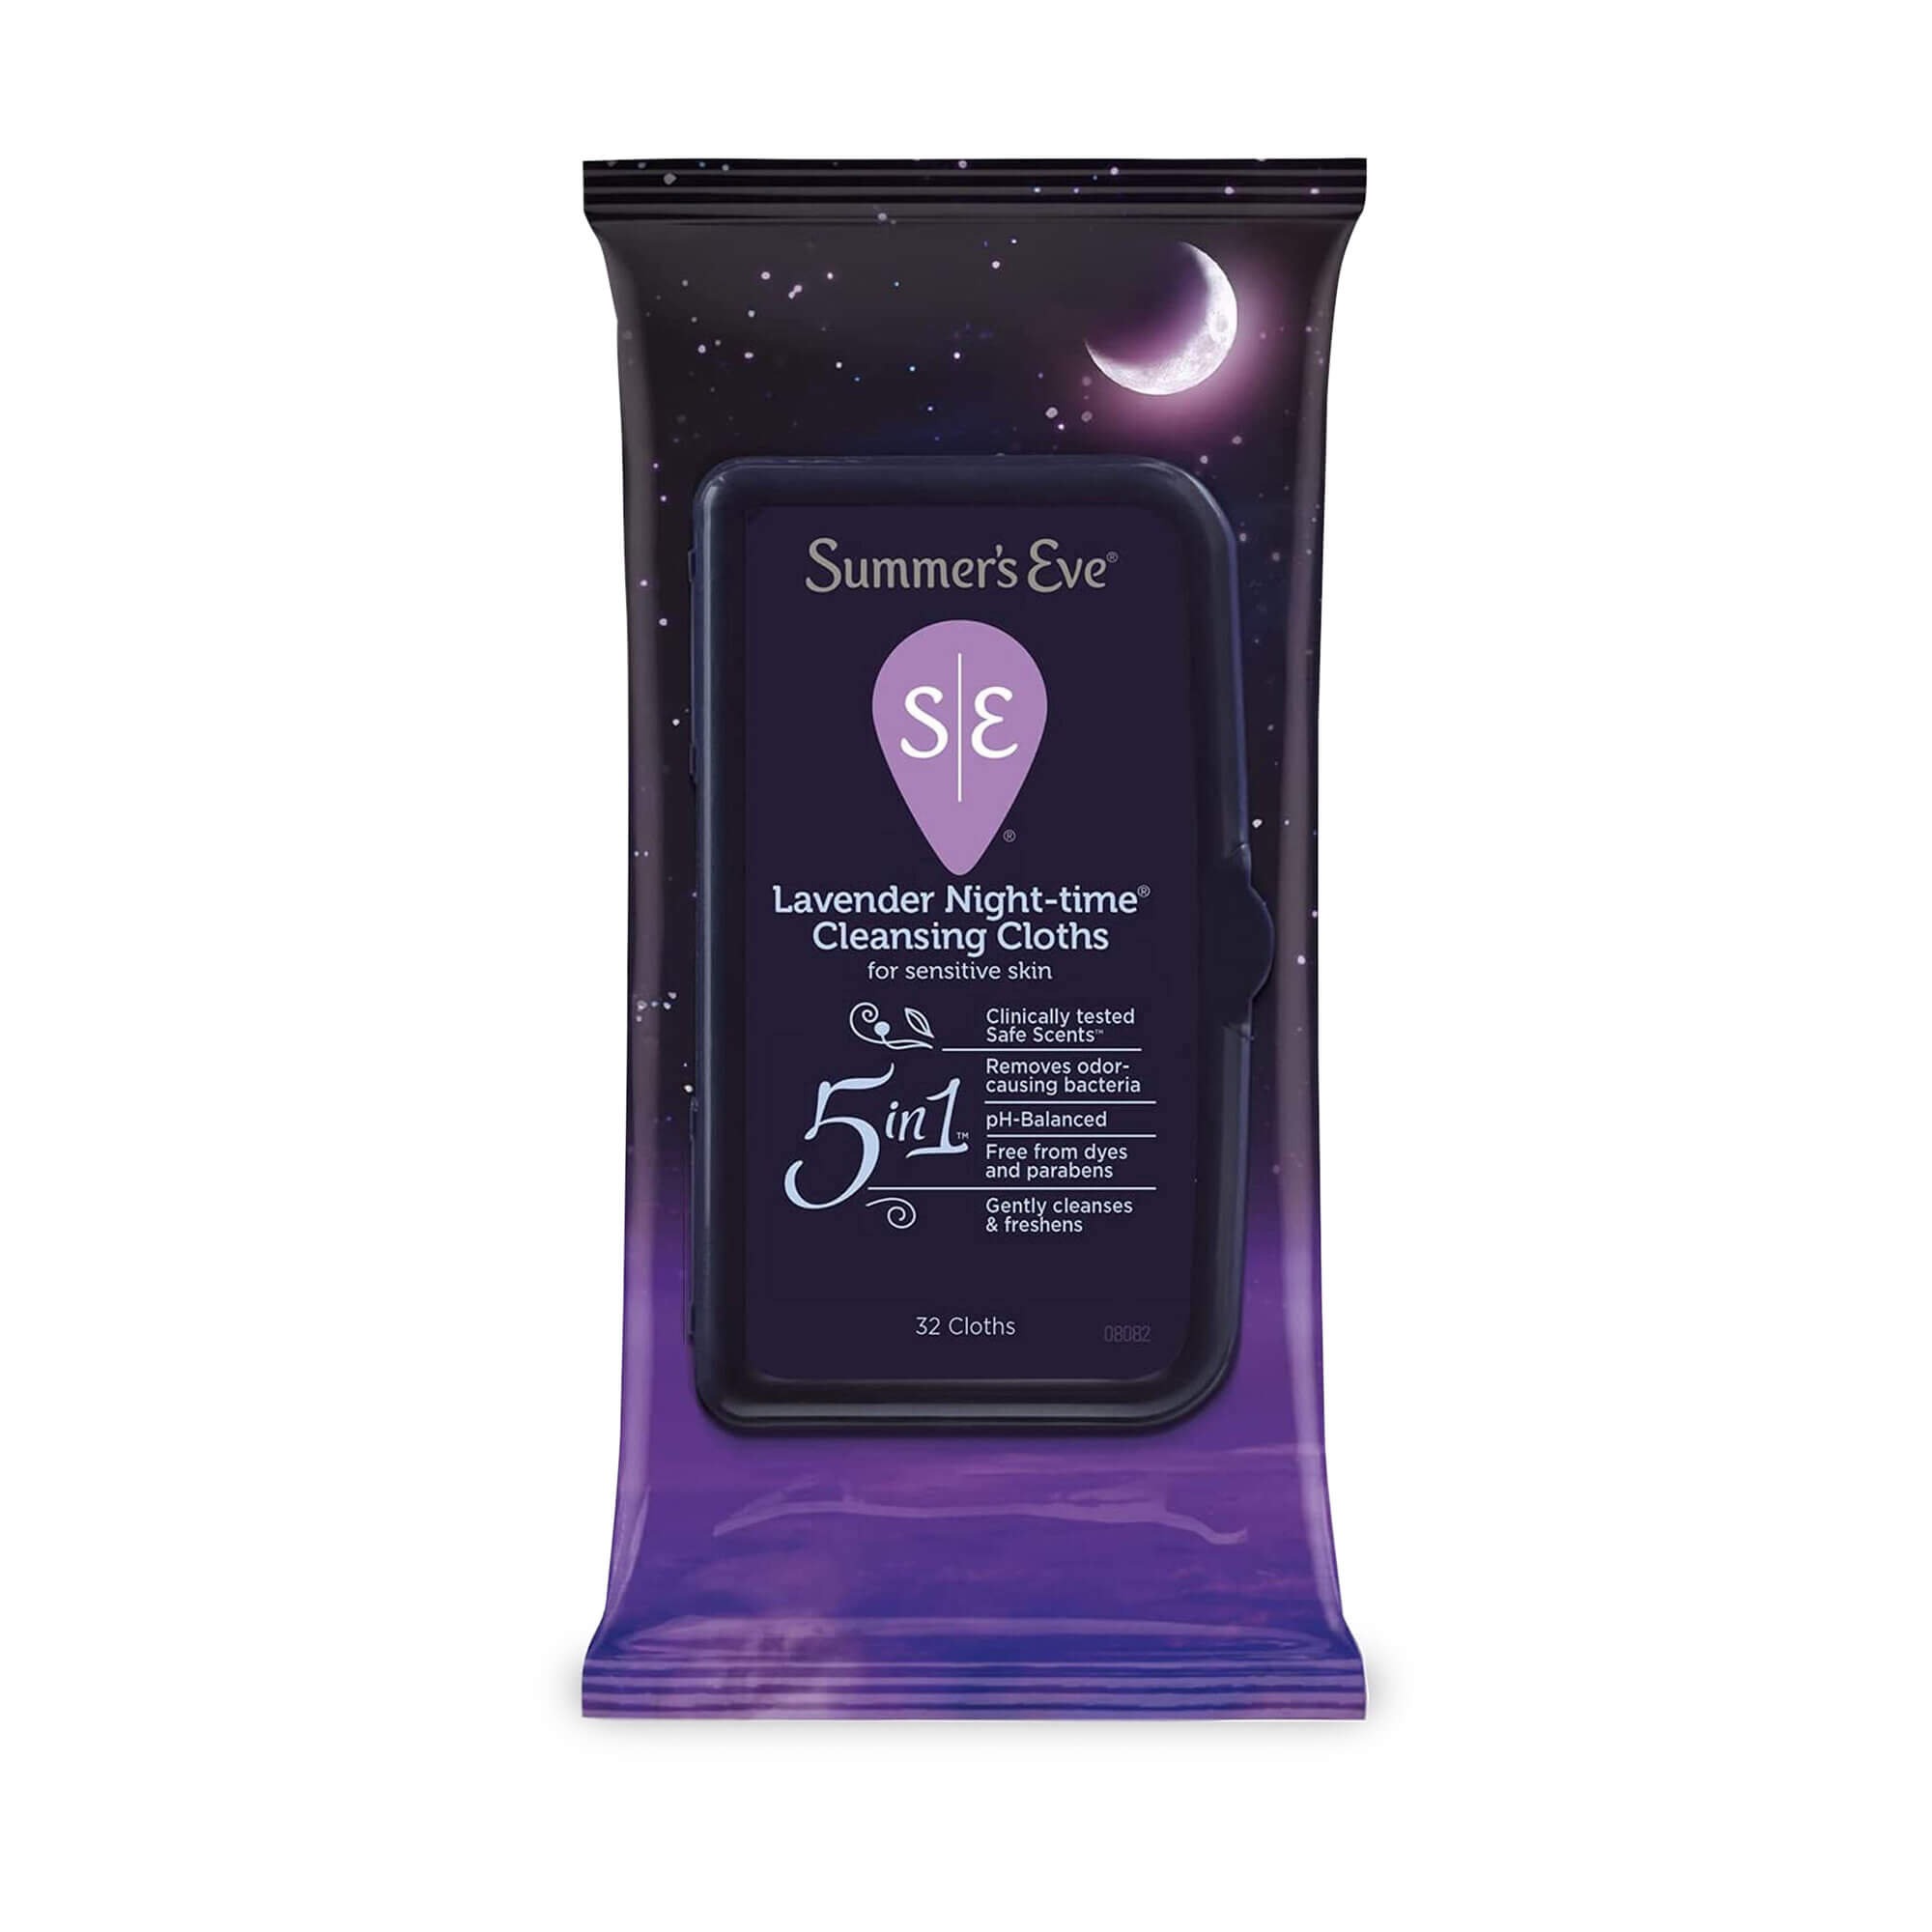 Lavender Night-time Cleansing Cloths